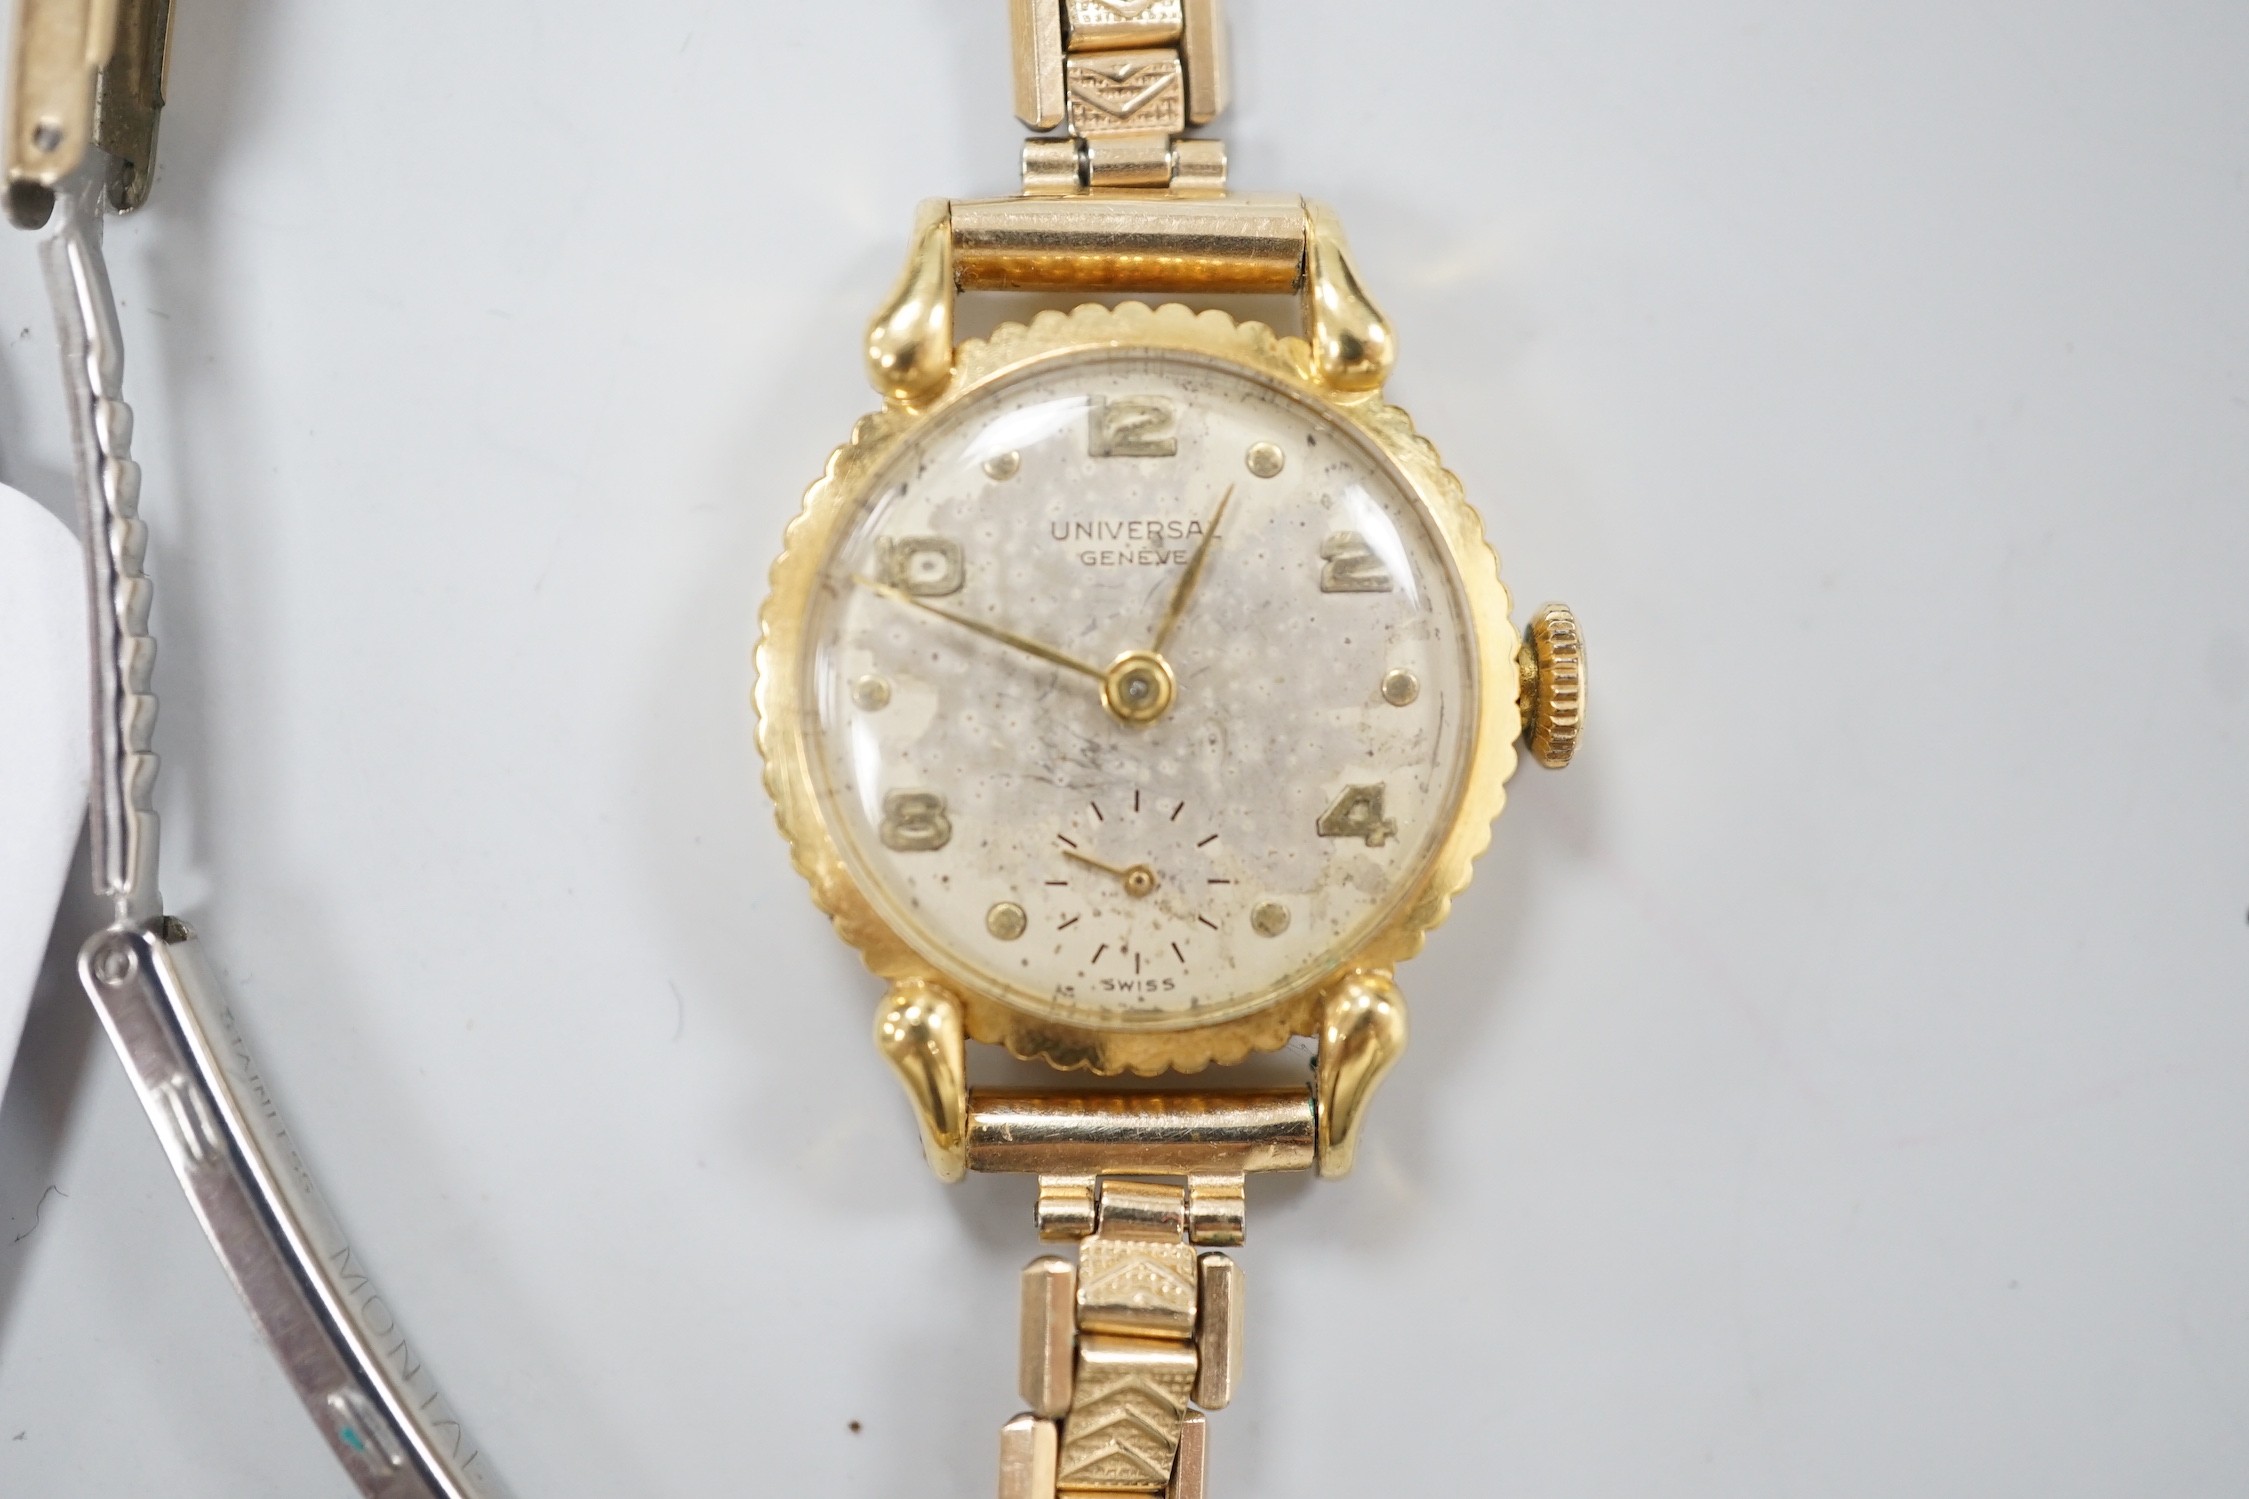 A lady's 750 yellow metal Universal manual wind wrist watch, on associated gold plated bracelet.